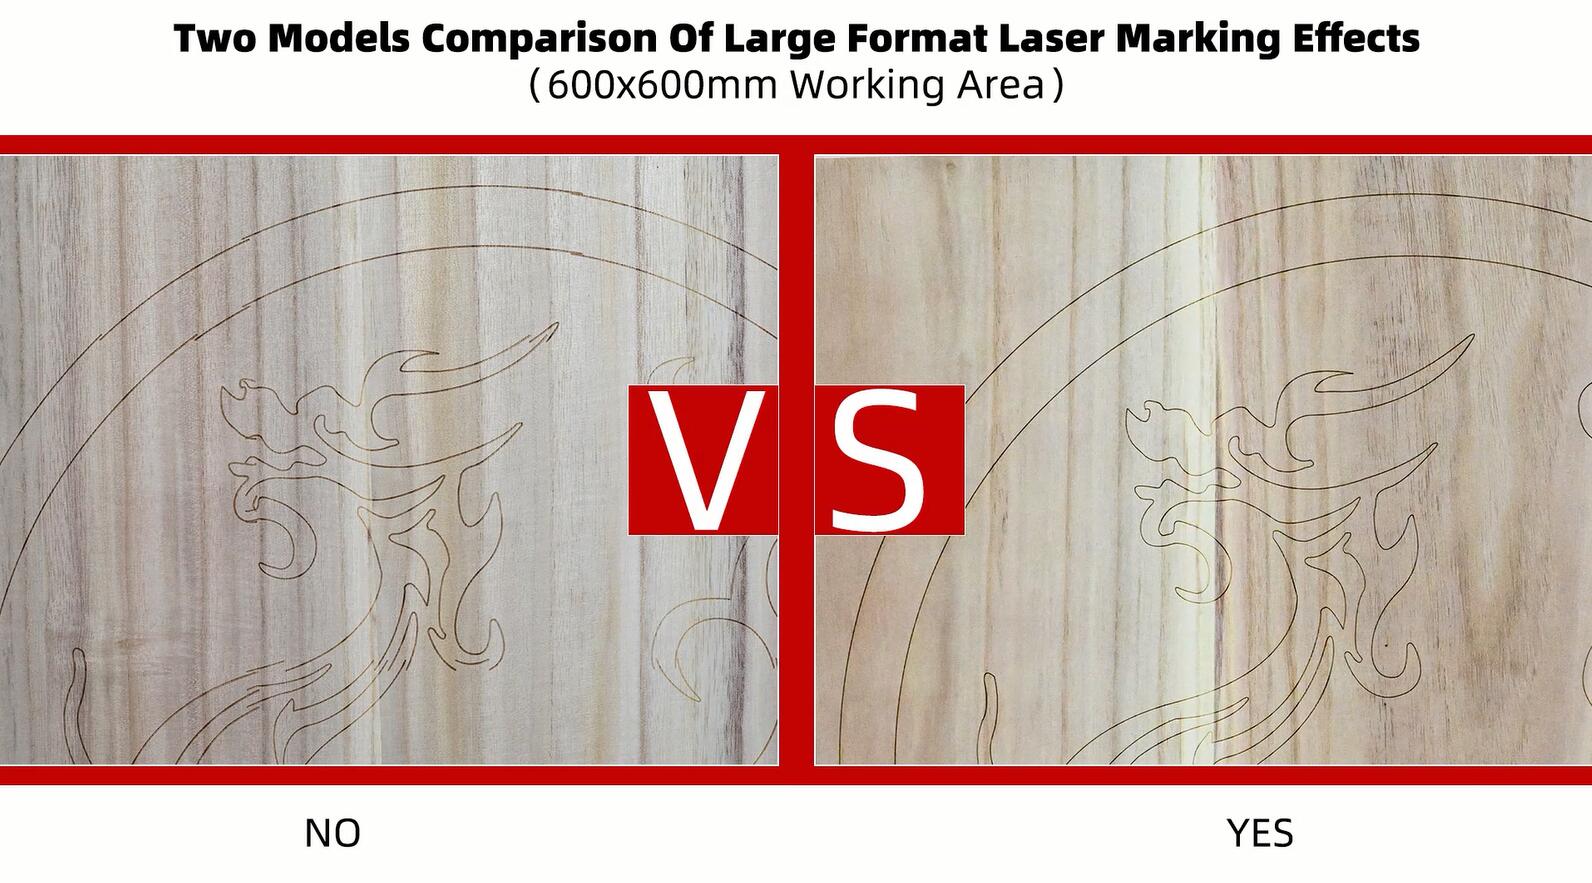 How to choose a large format laser marking machine?